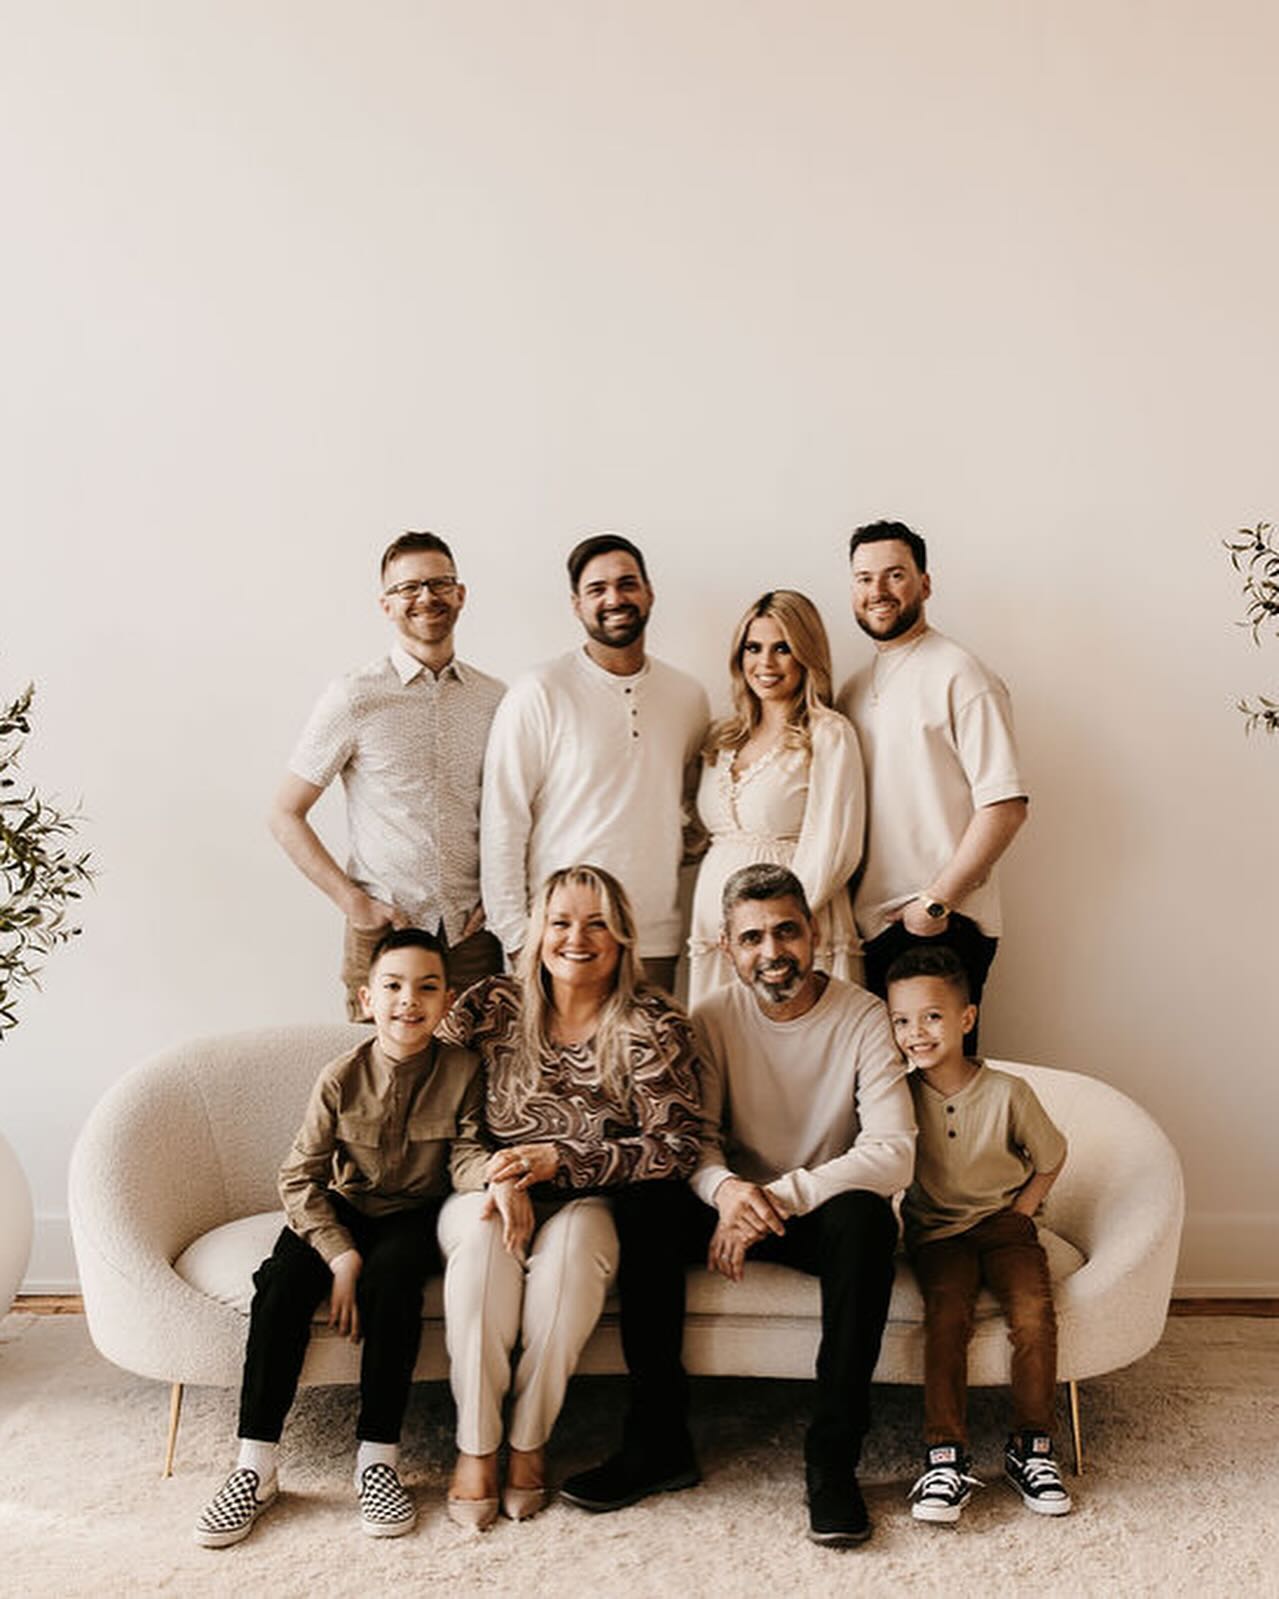 Obsessed with my beautifully blended & chaotic family.

The real modern family! 😂🤍🙏🏼 #blessed #family #blendedfamily #life 

📸: @erin_nicolephotography 
📍: @studiosunsetchicago
💄: @jacquesxmakeup